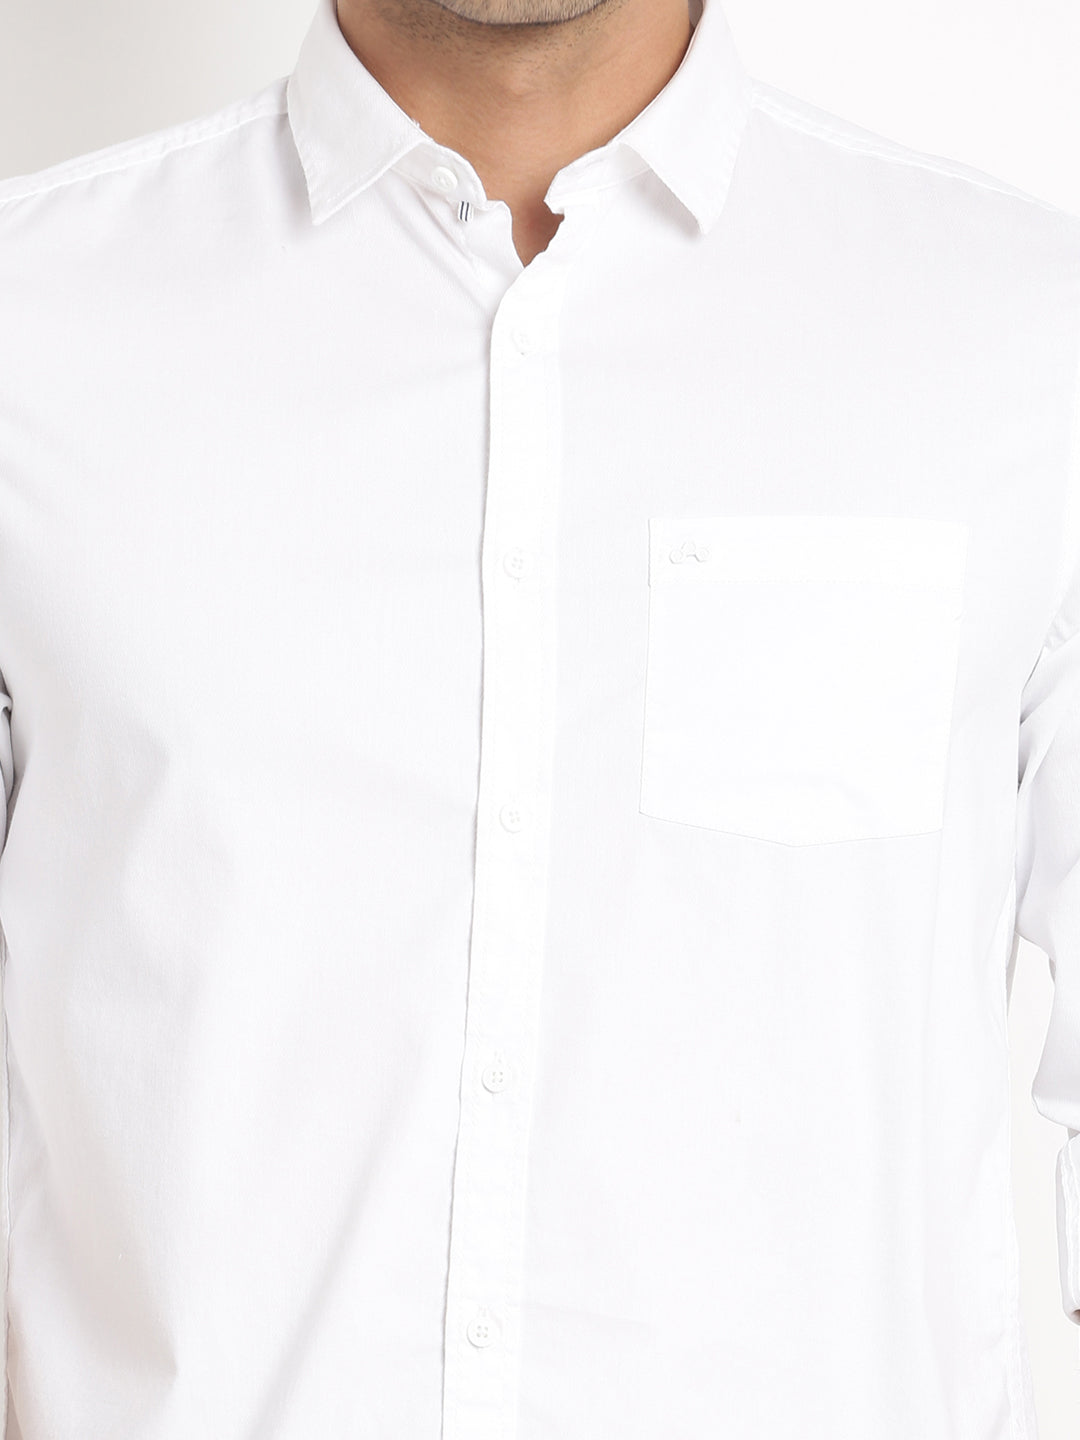 Cotton Stretch White Plain Slim Fit Full Sleeve Casual Shirt